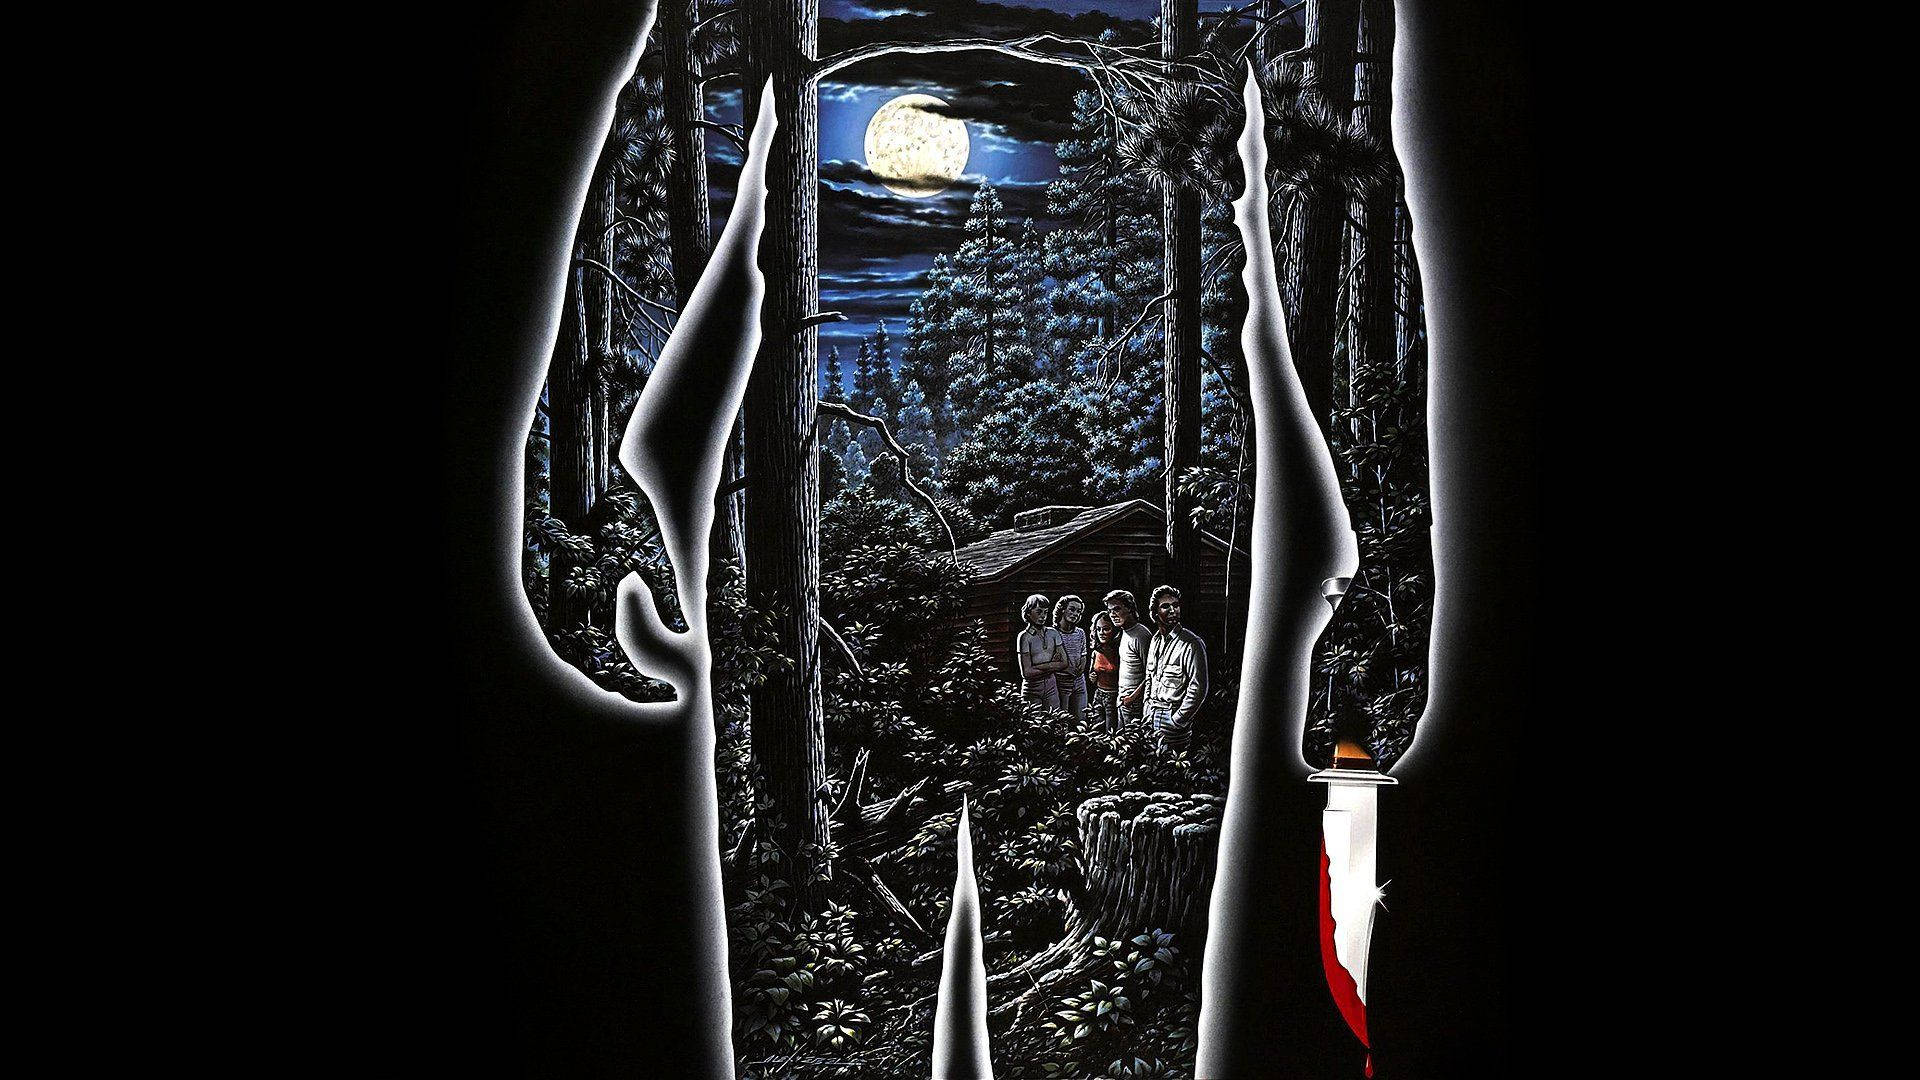 First Poster Of Friday The 13th Wallpaper